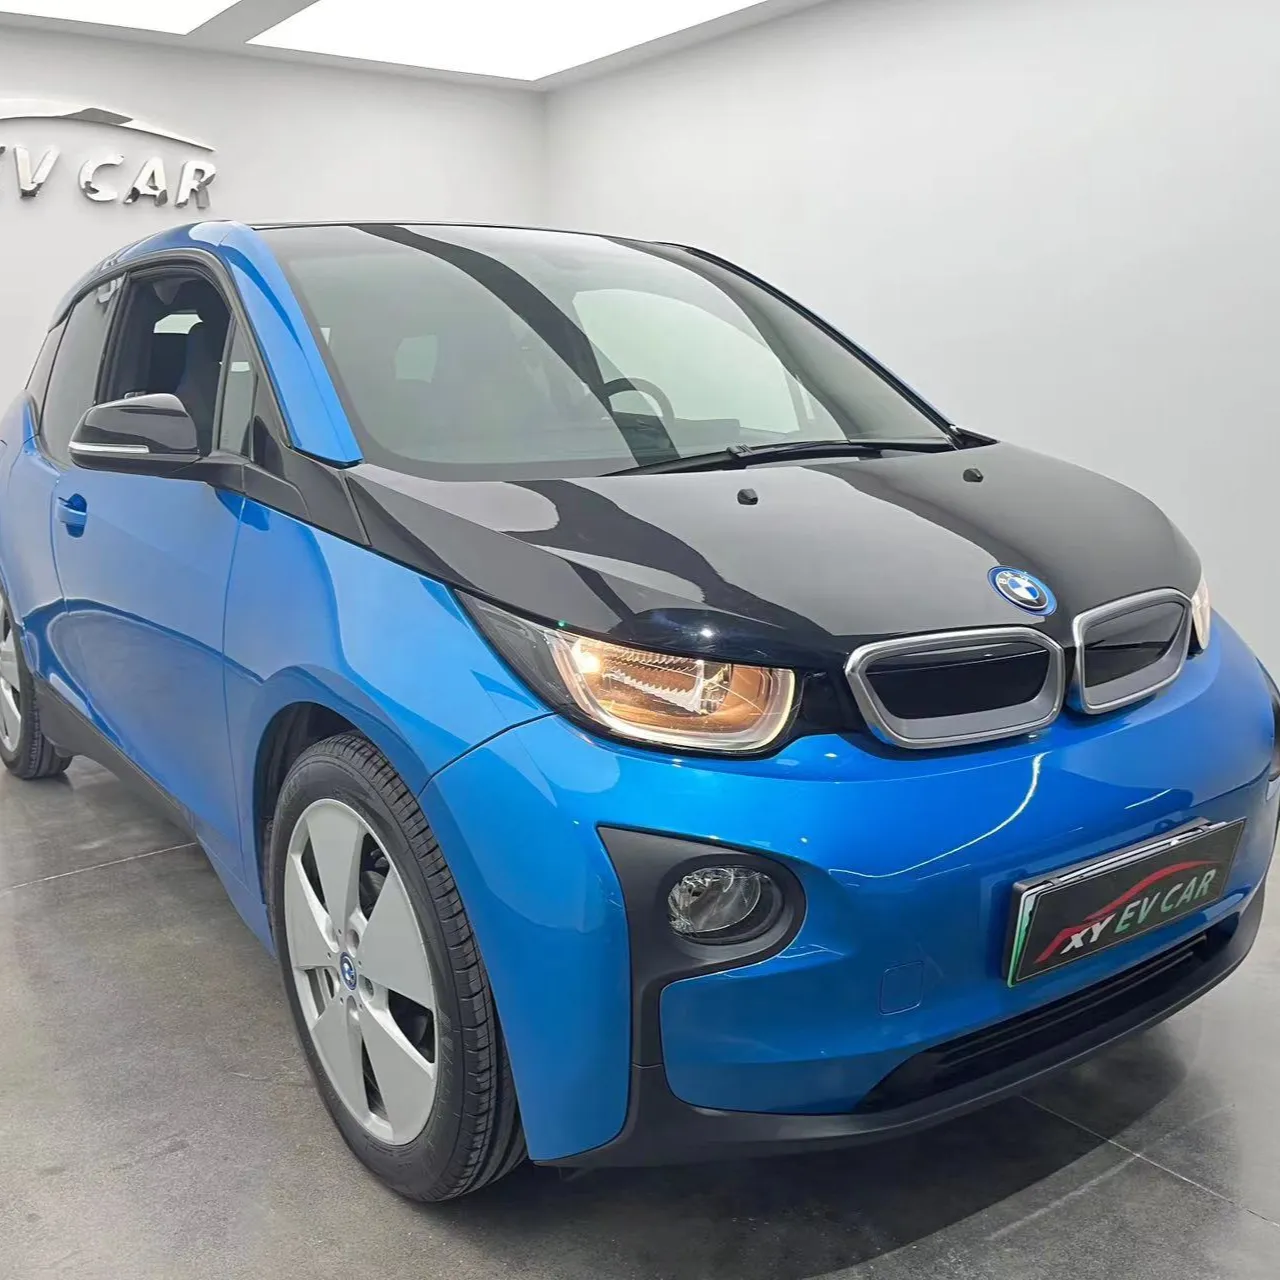 In stock XXY Cheap Ued BMWw i3 electric Cars Hot Selling 4 Wheels low consumption good-looking EV CAR